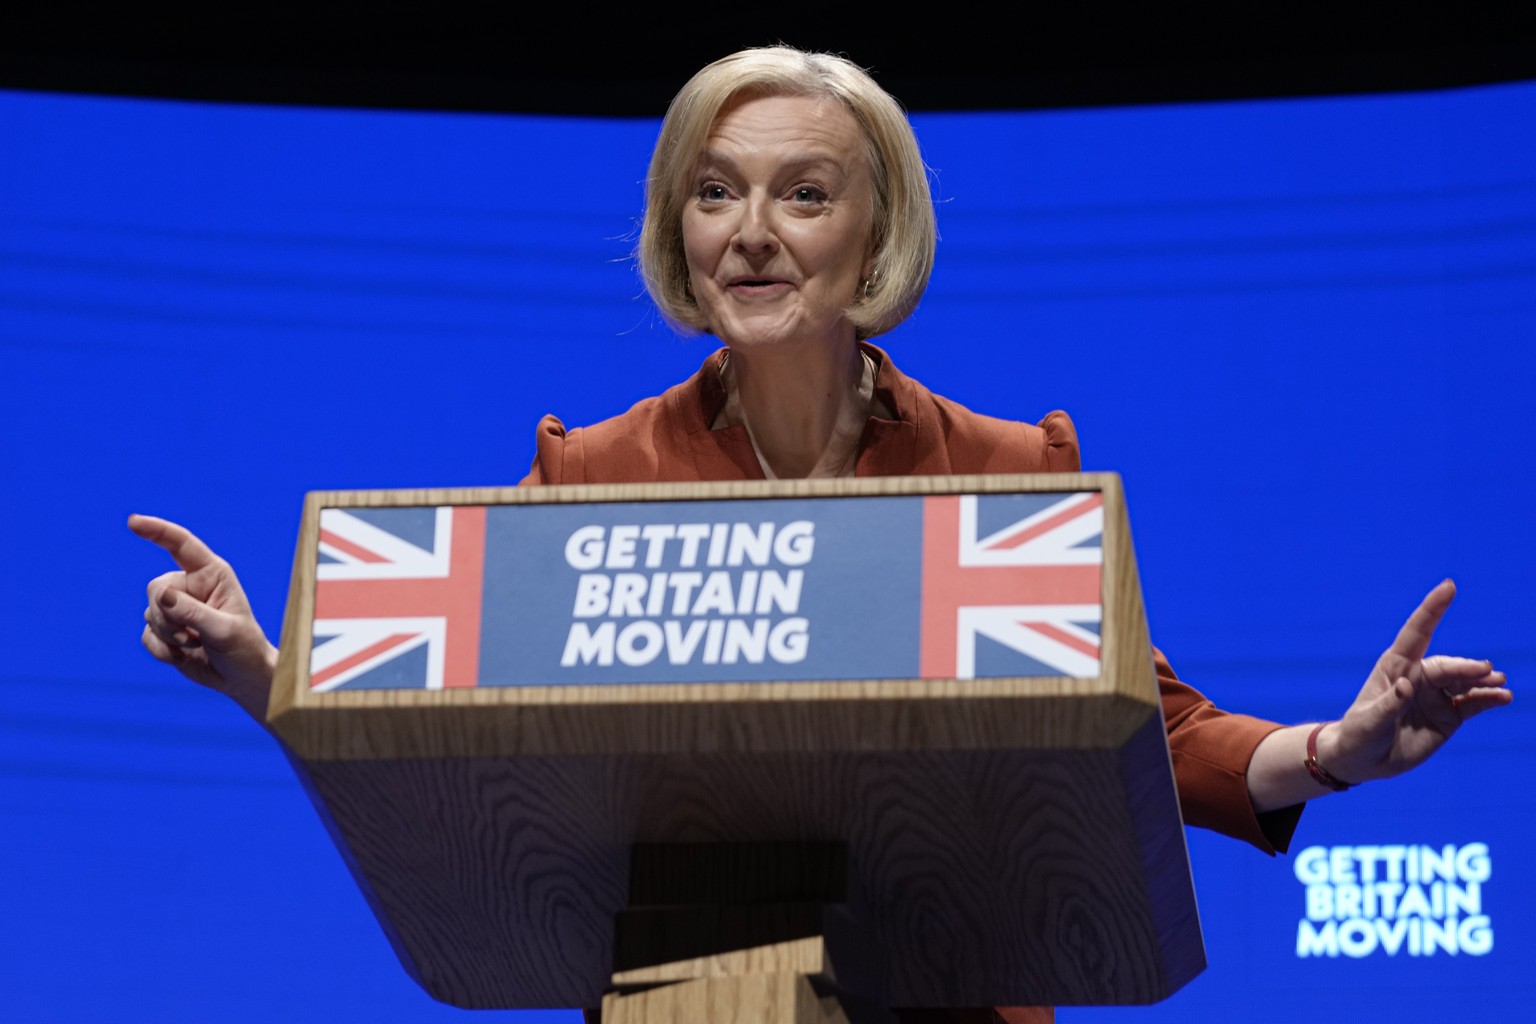 Britain&#039;s Prime Minister Liz Truss makes a speech at the Conservative Party conference at the ICC in Birmingham, England, Wednesday, Oct. 5, 2022. (AP Photo/Kirsty Wigglesworth)